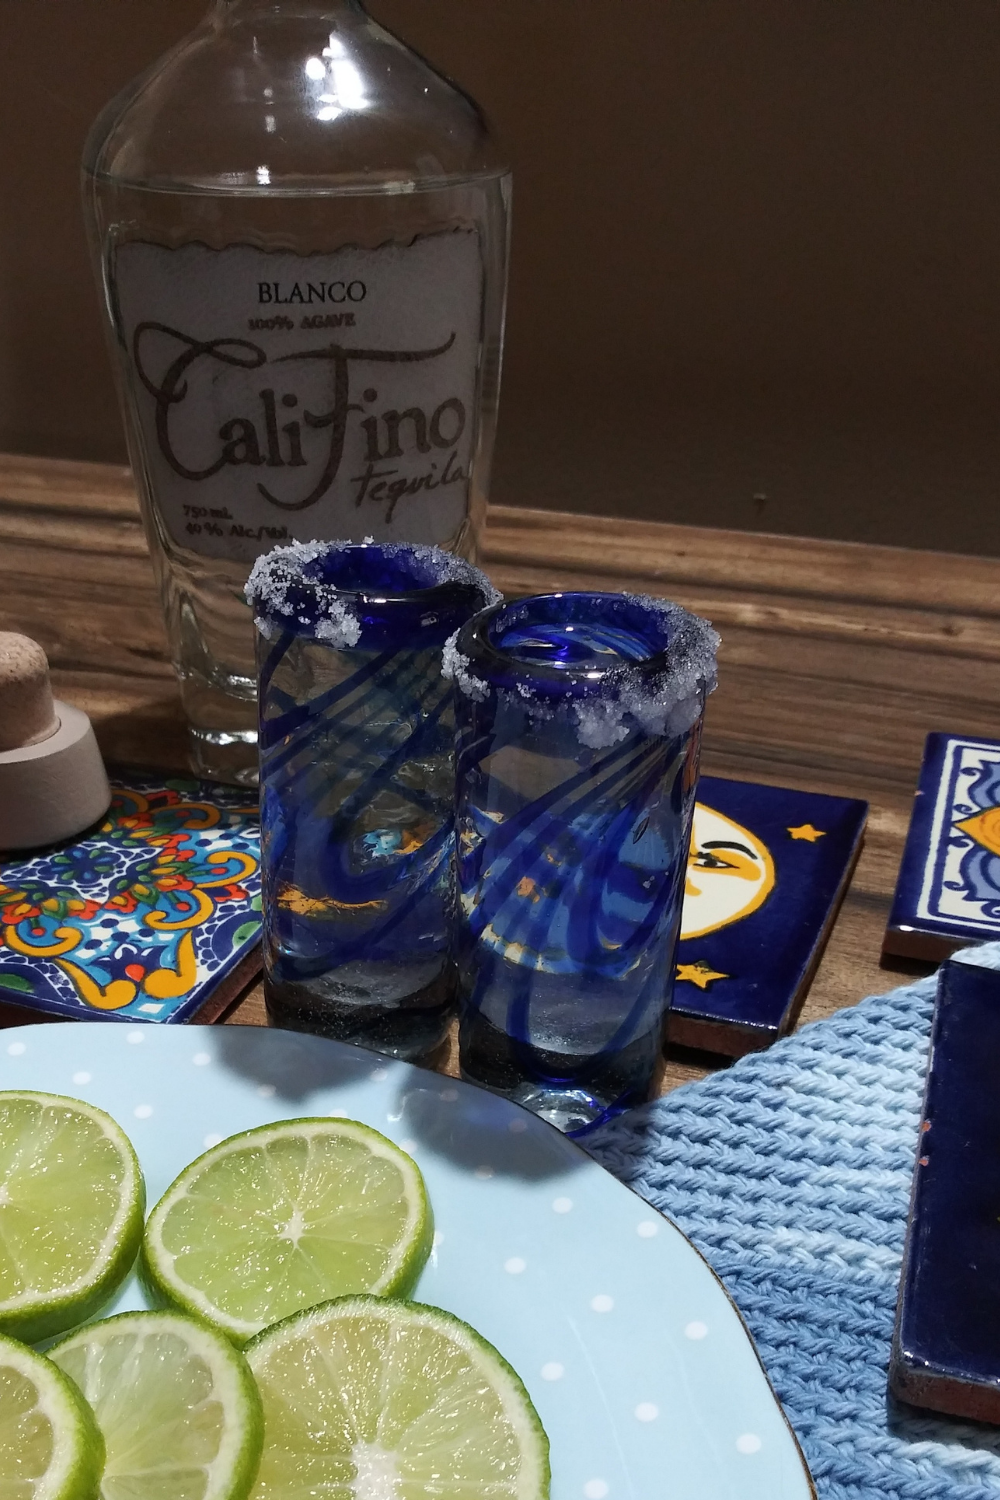 CaliFino Tequila Special Mother’s Day Gift Set 2022